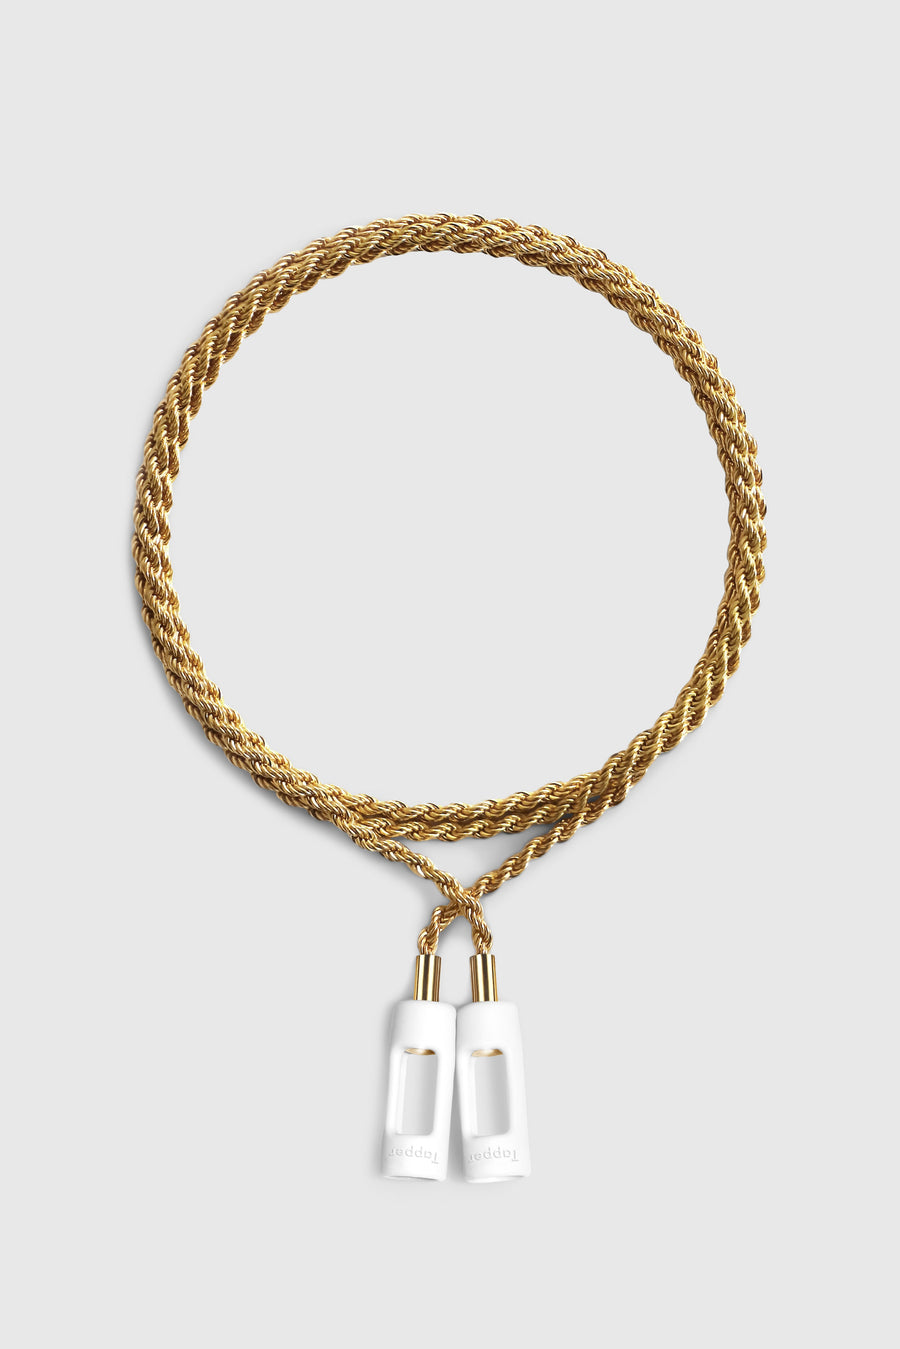 Tapper's real 18K gold plated original rope chain jewelry necklace protects your Apple AirPods & AirPods Pro. The luxurious, elevated & accessible rope chain jewellery plated in precious metals snaps the AirPods around your neck. Lose your AirPods? Magnetic lock for convenient and hassle-free safekeeping around your neck. The next must-have & affordable AirPods accessory crafted for ultimate luxury. Compatible with AirPods & AirPods Pro. Designed in Sweden by Tapper. Free Shipping at gettapper.com